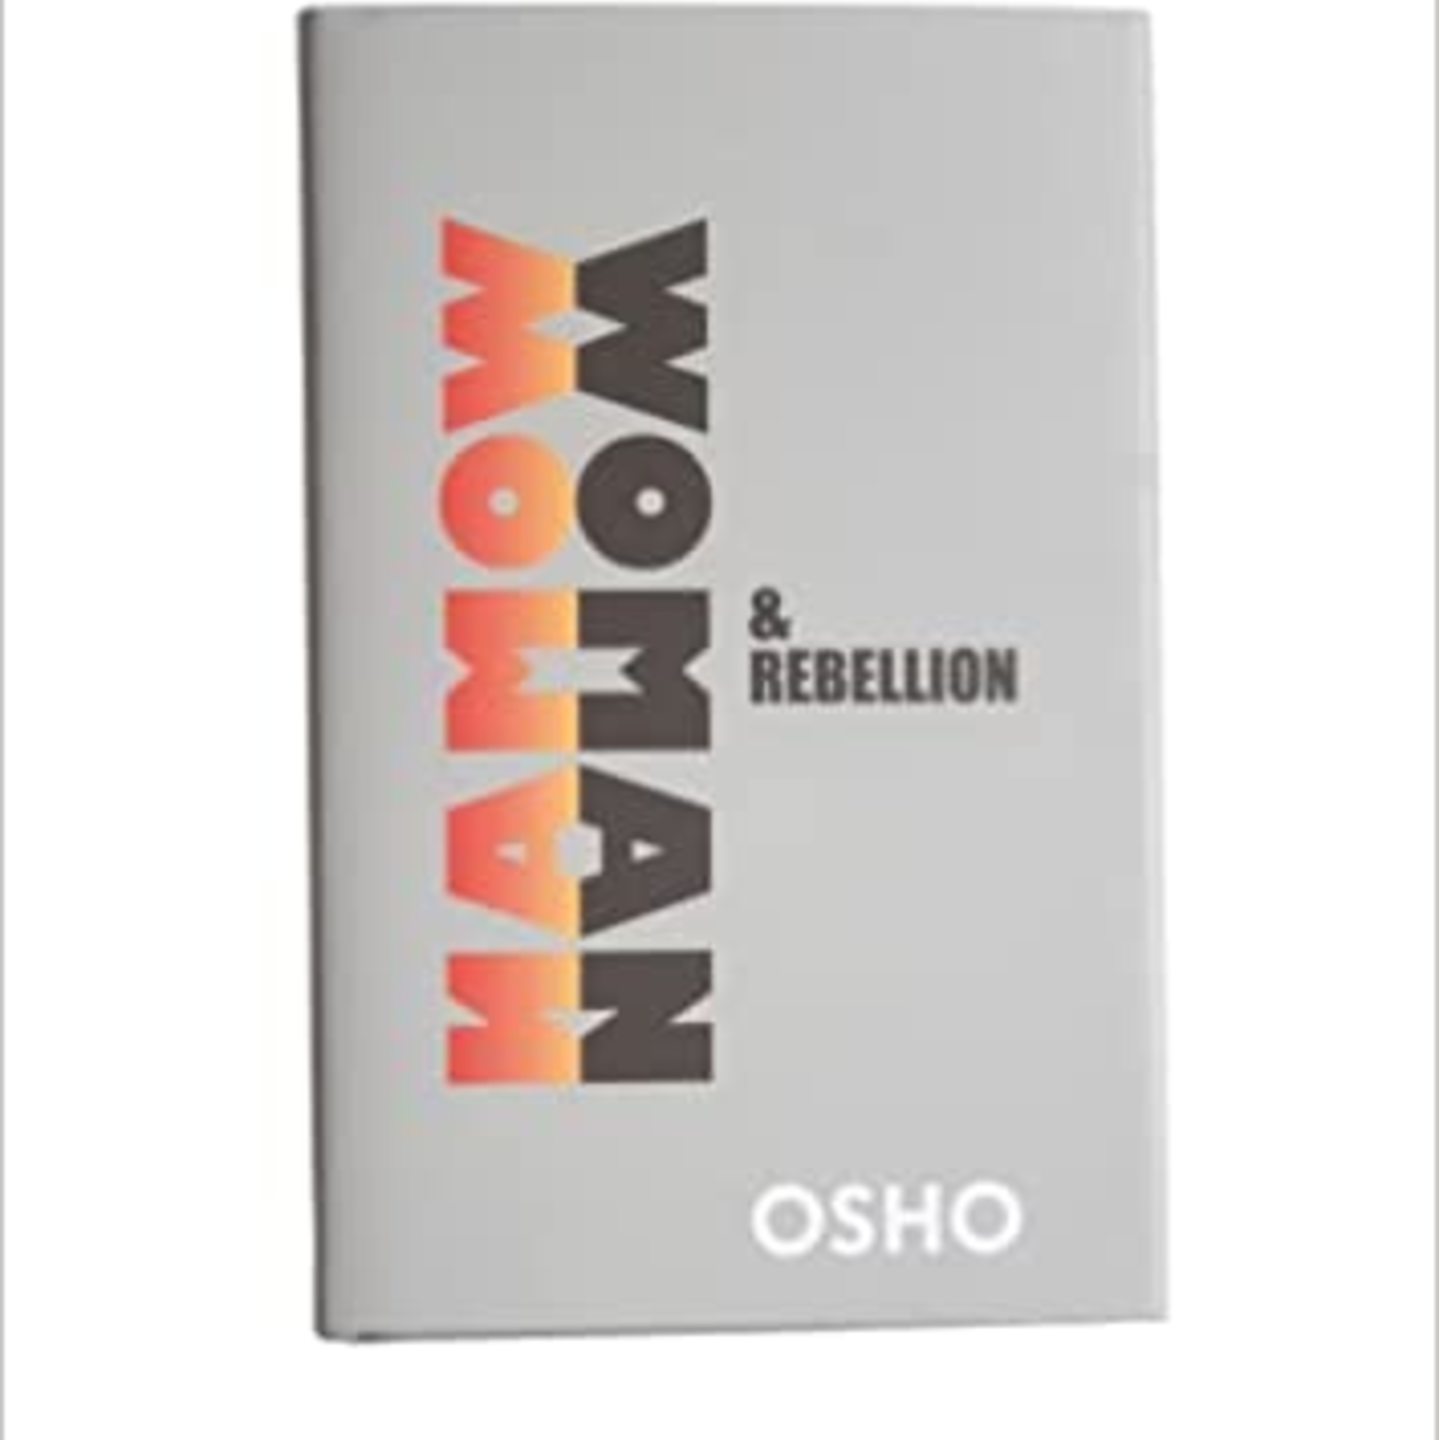 Woman and Rebellion Osho